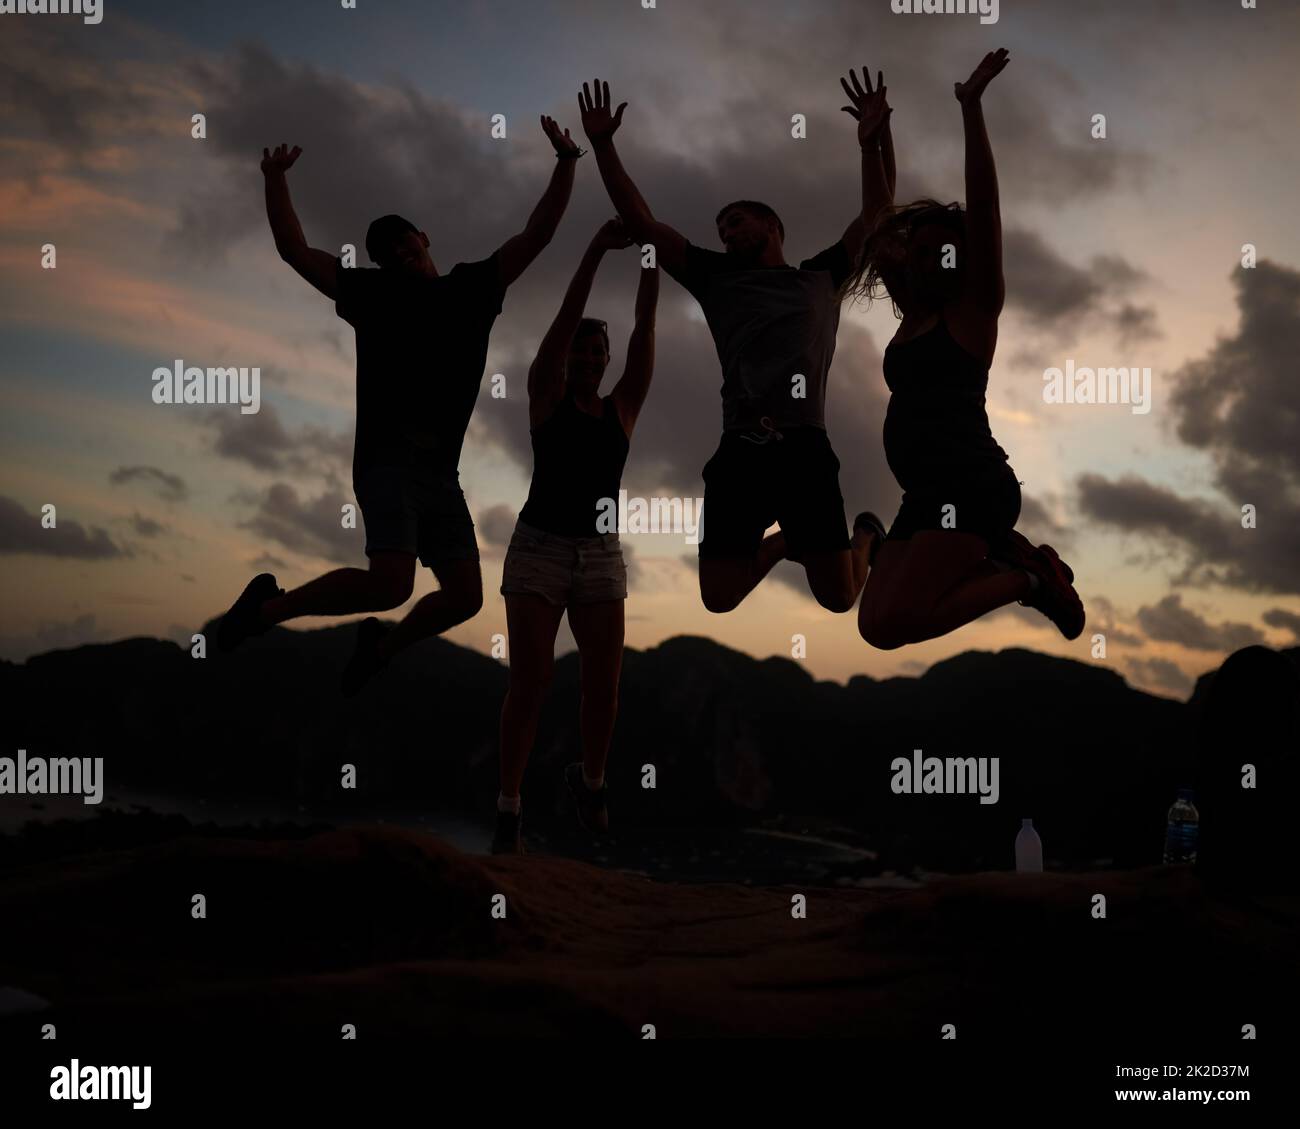 Jumping for joy. Shot of a group of jumping friends silhouetted against a sunset. Stock Photo